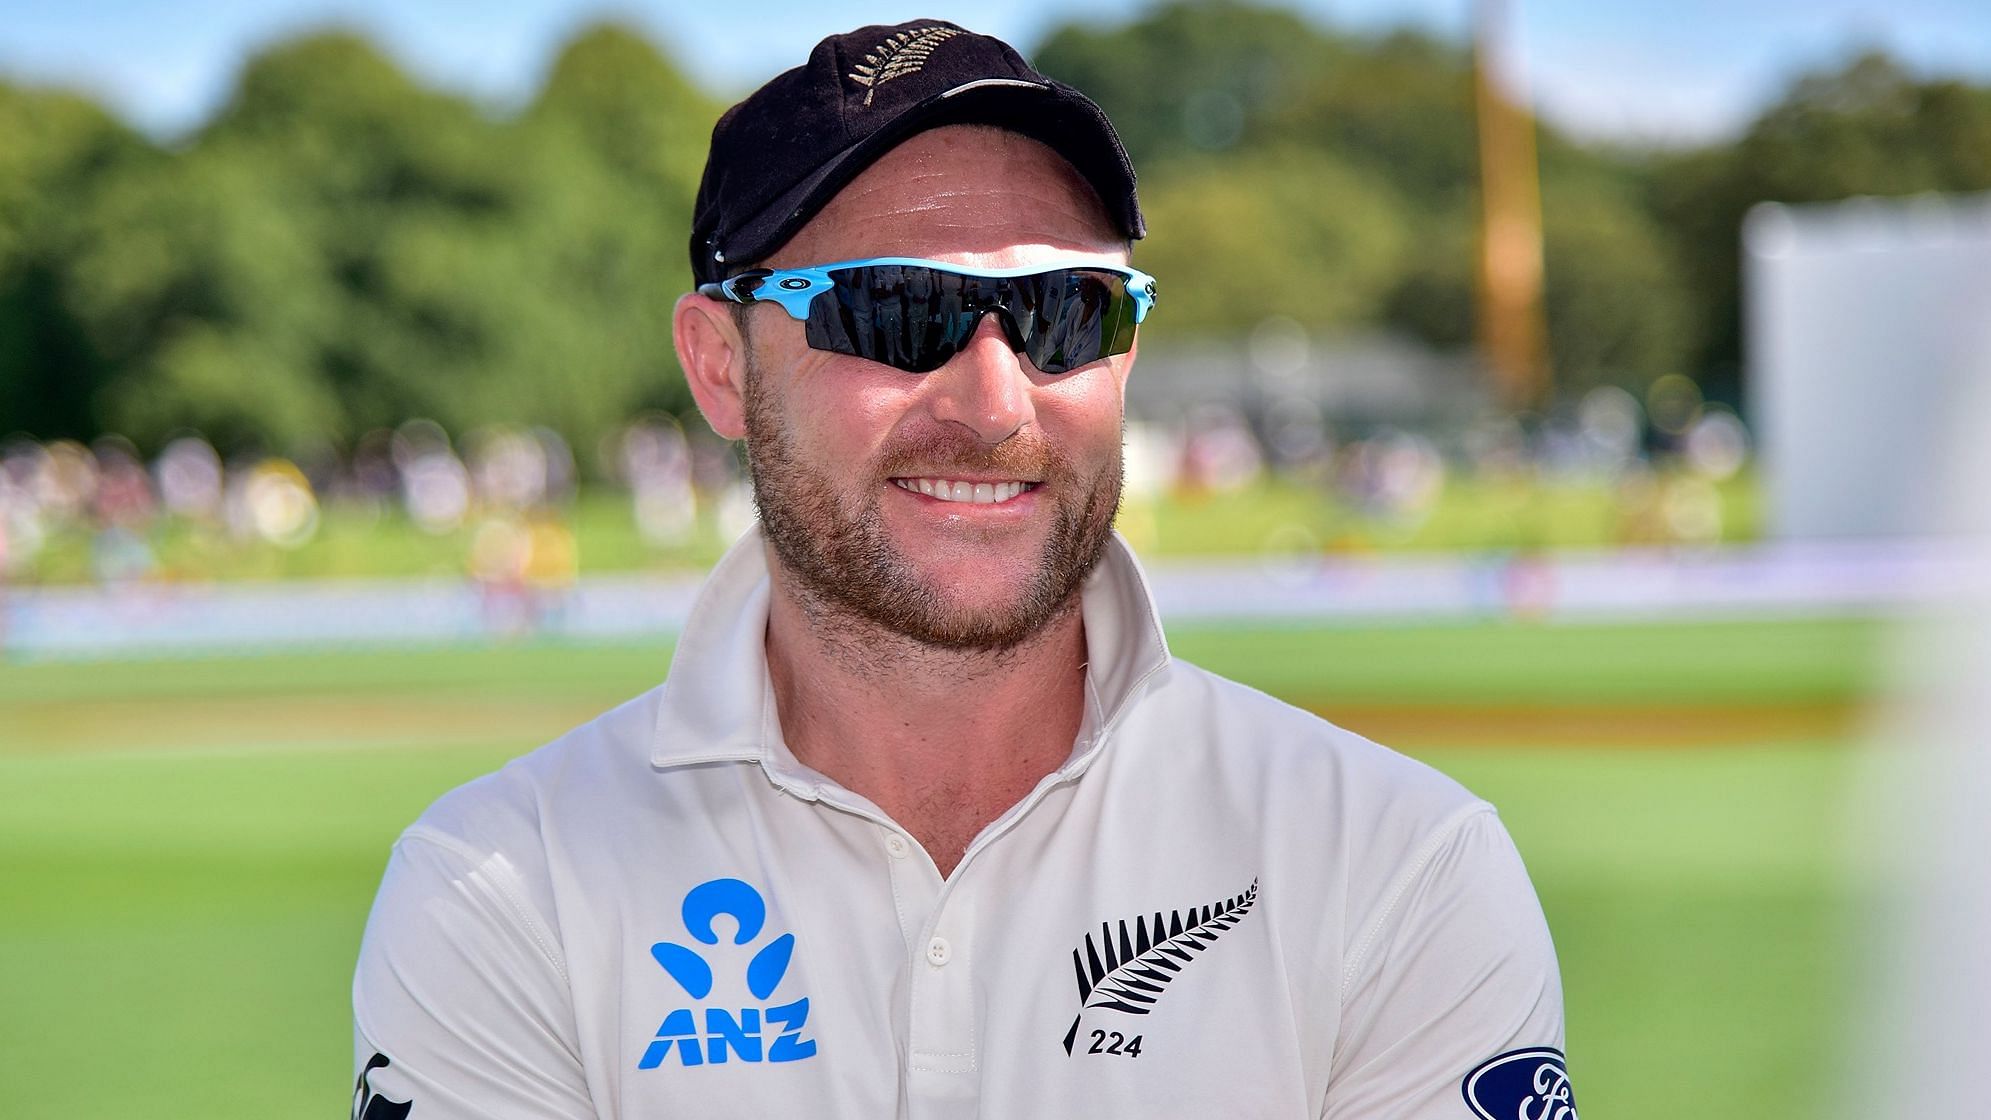 Kolkata Knight Riders appointed the recently retired Brendon McCullum as their new head coach.